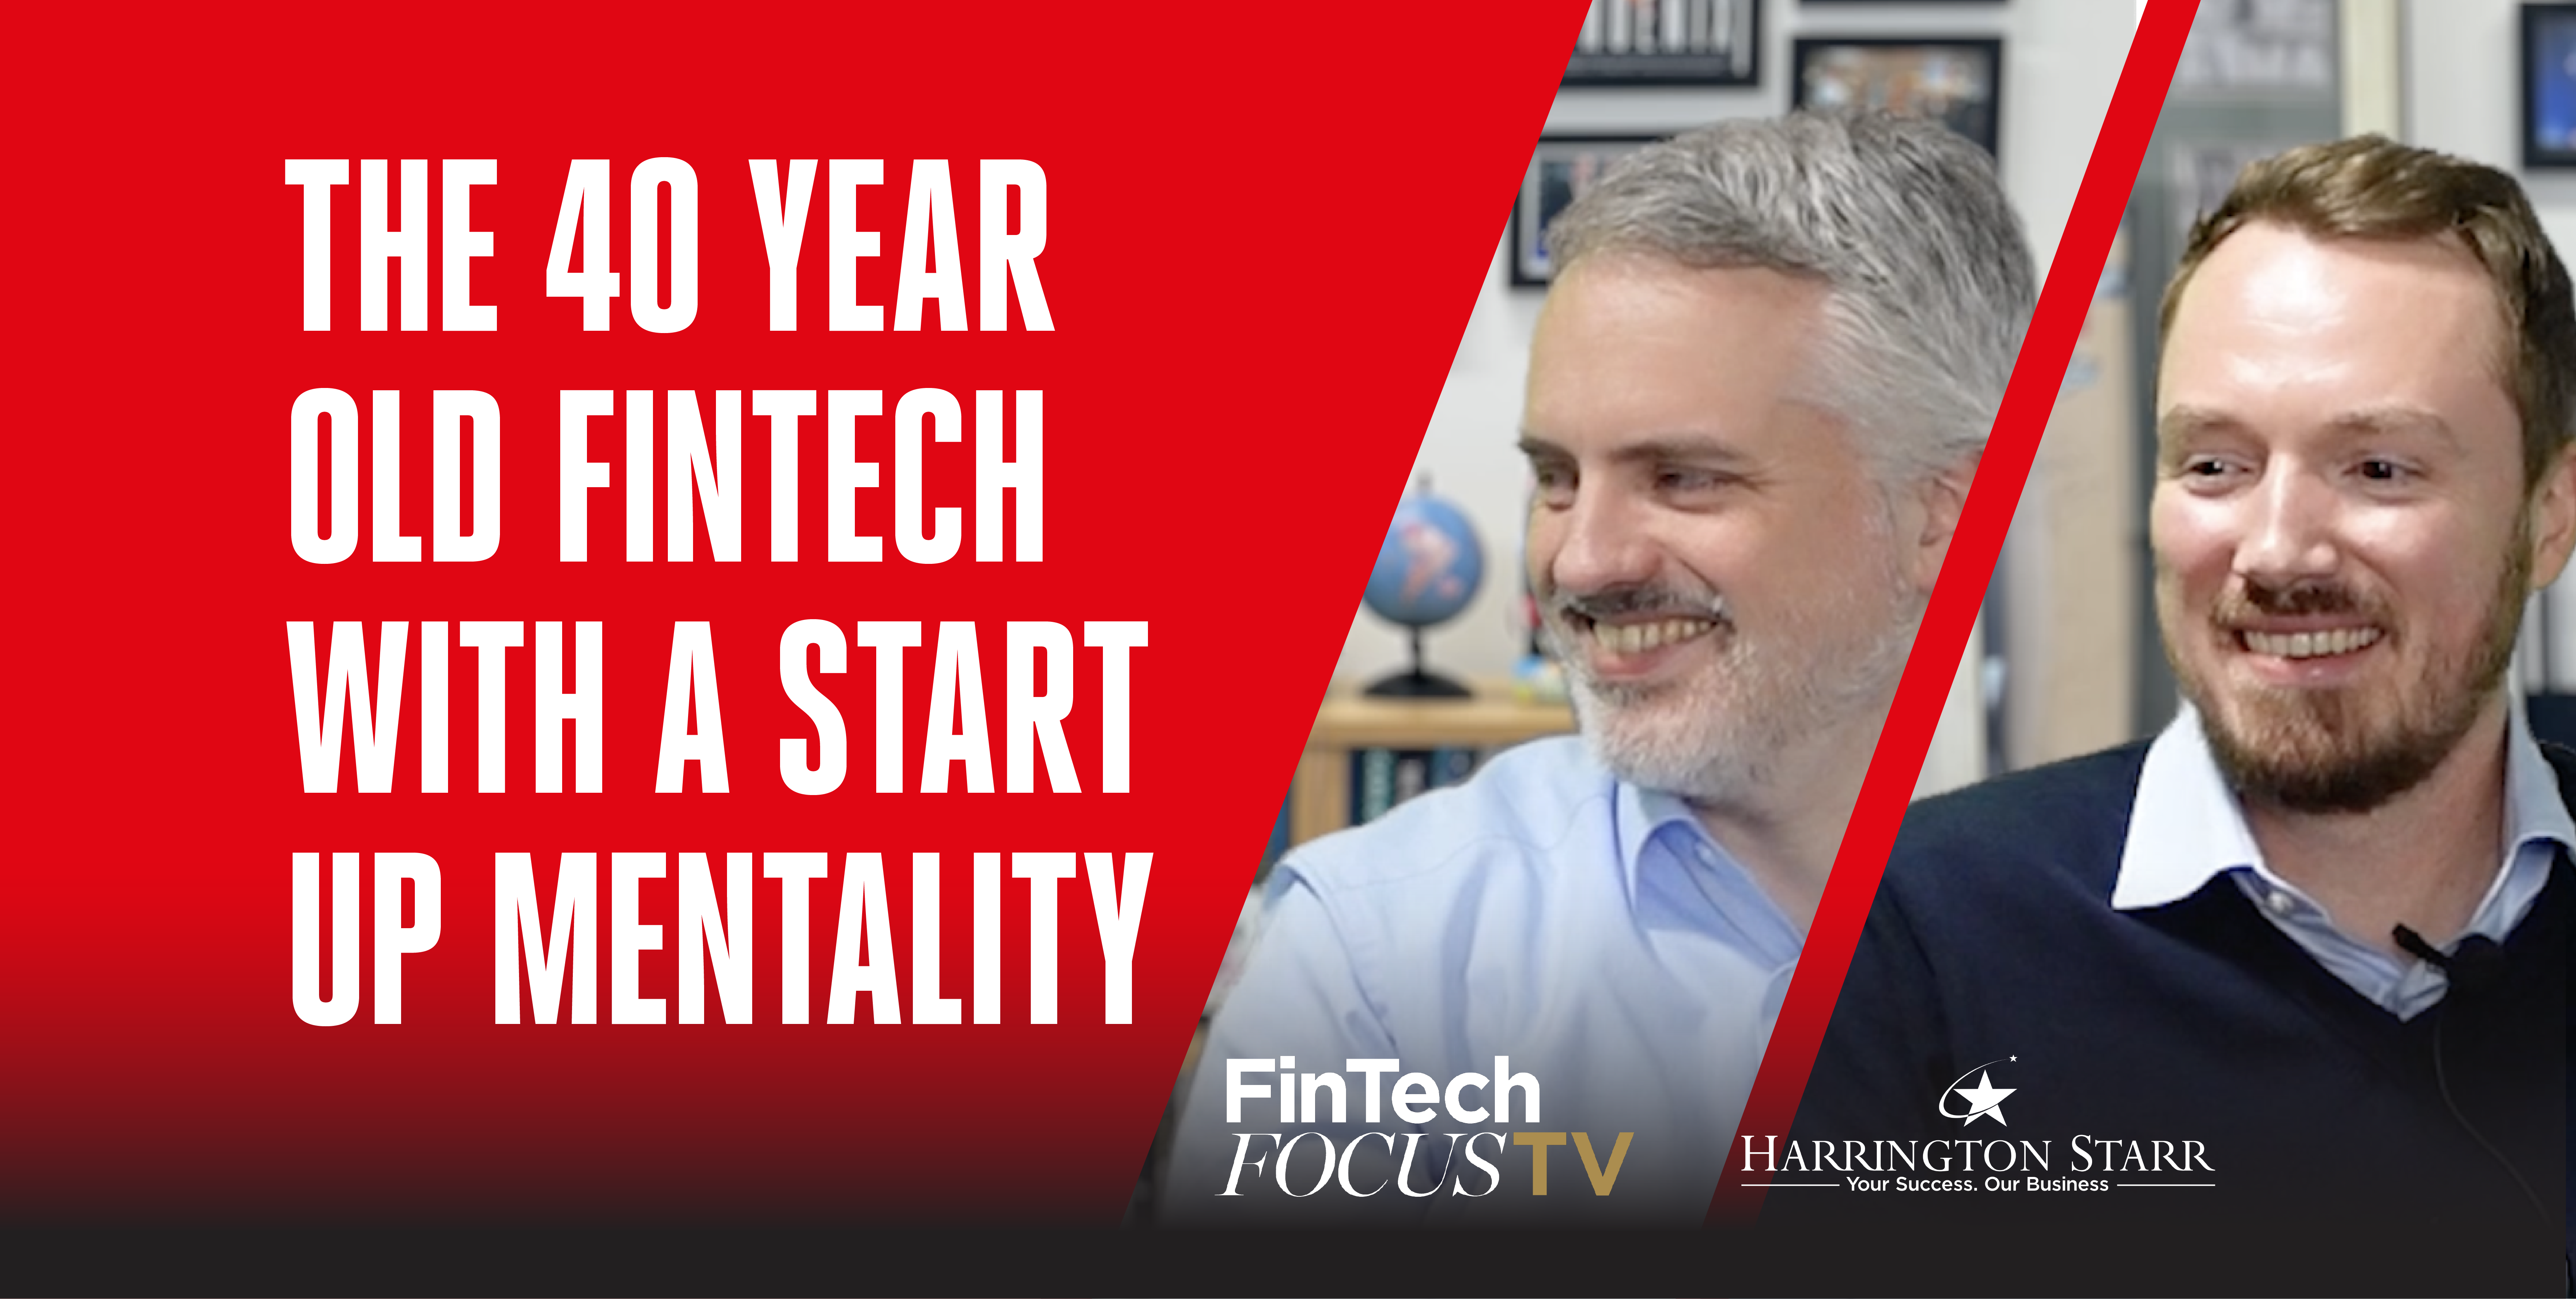 The 40 Year Old Fintech with a Start Up Mentality